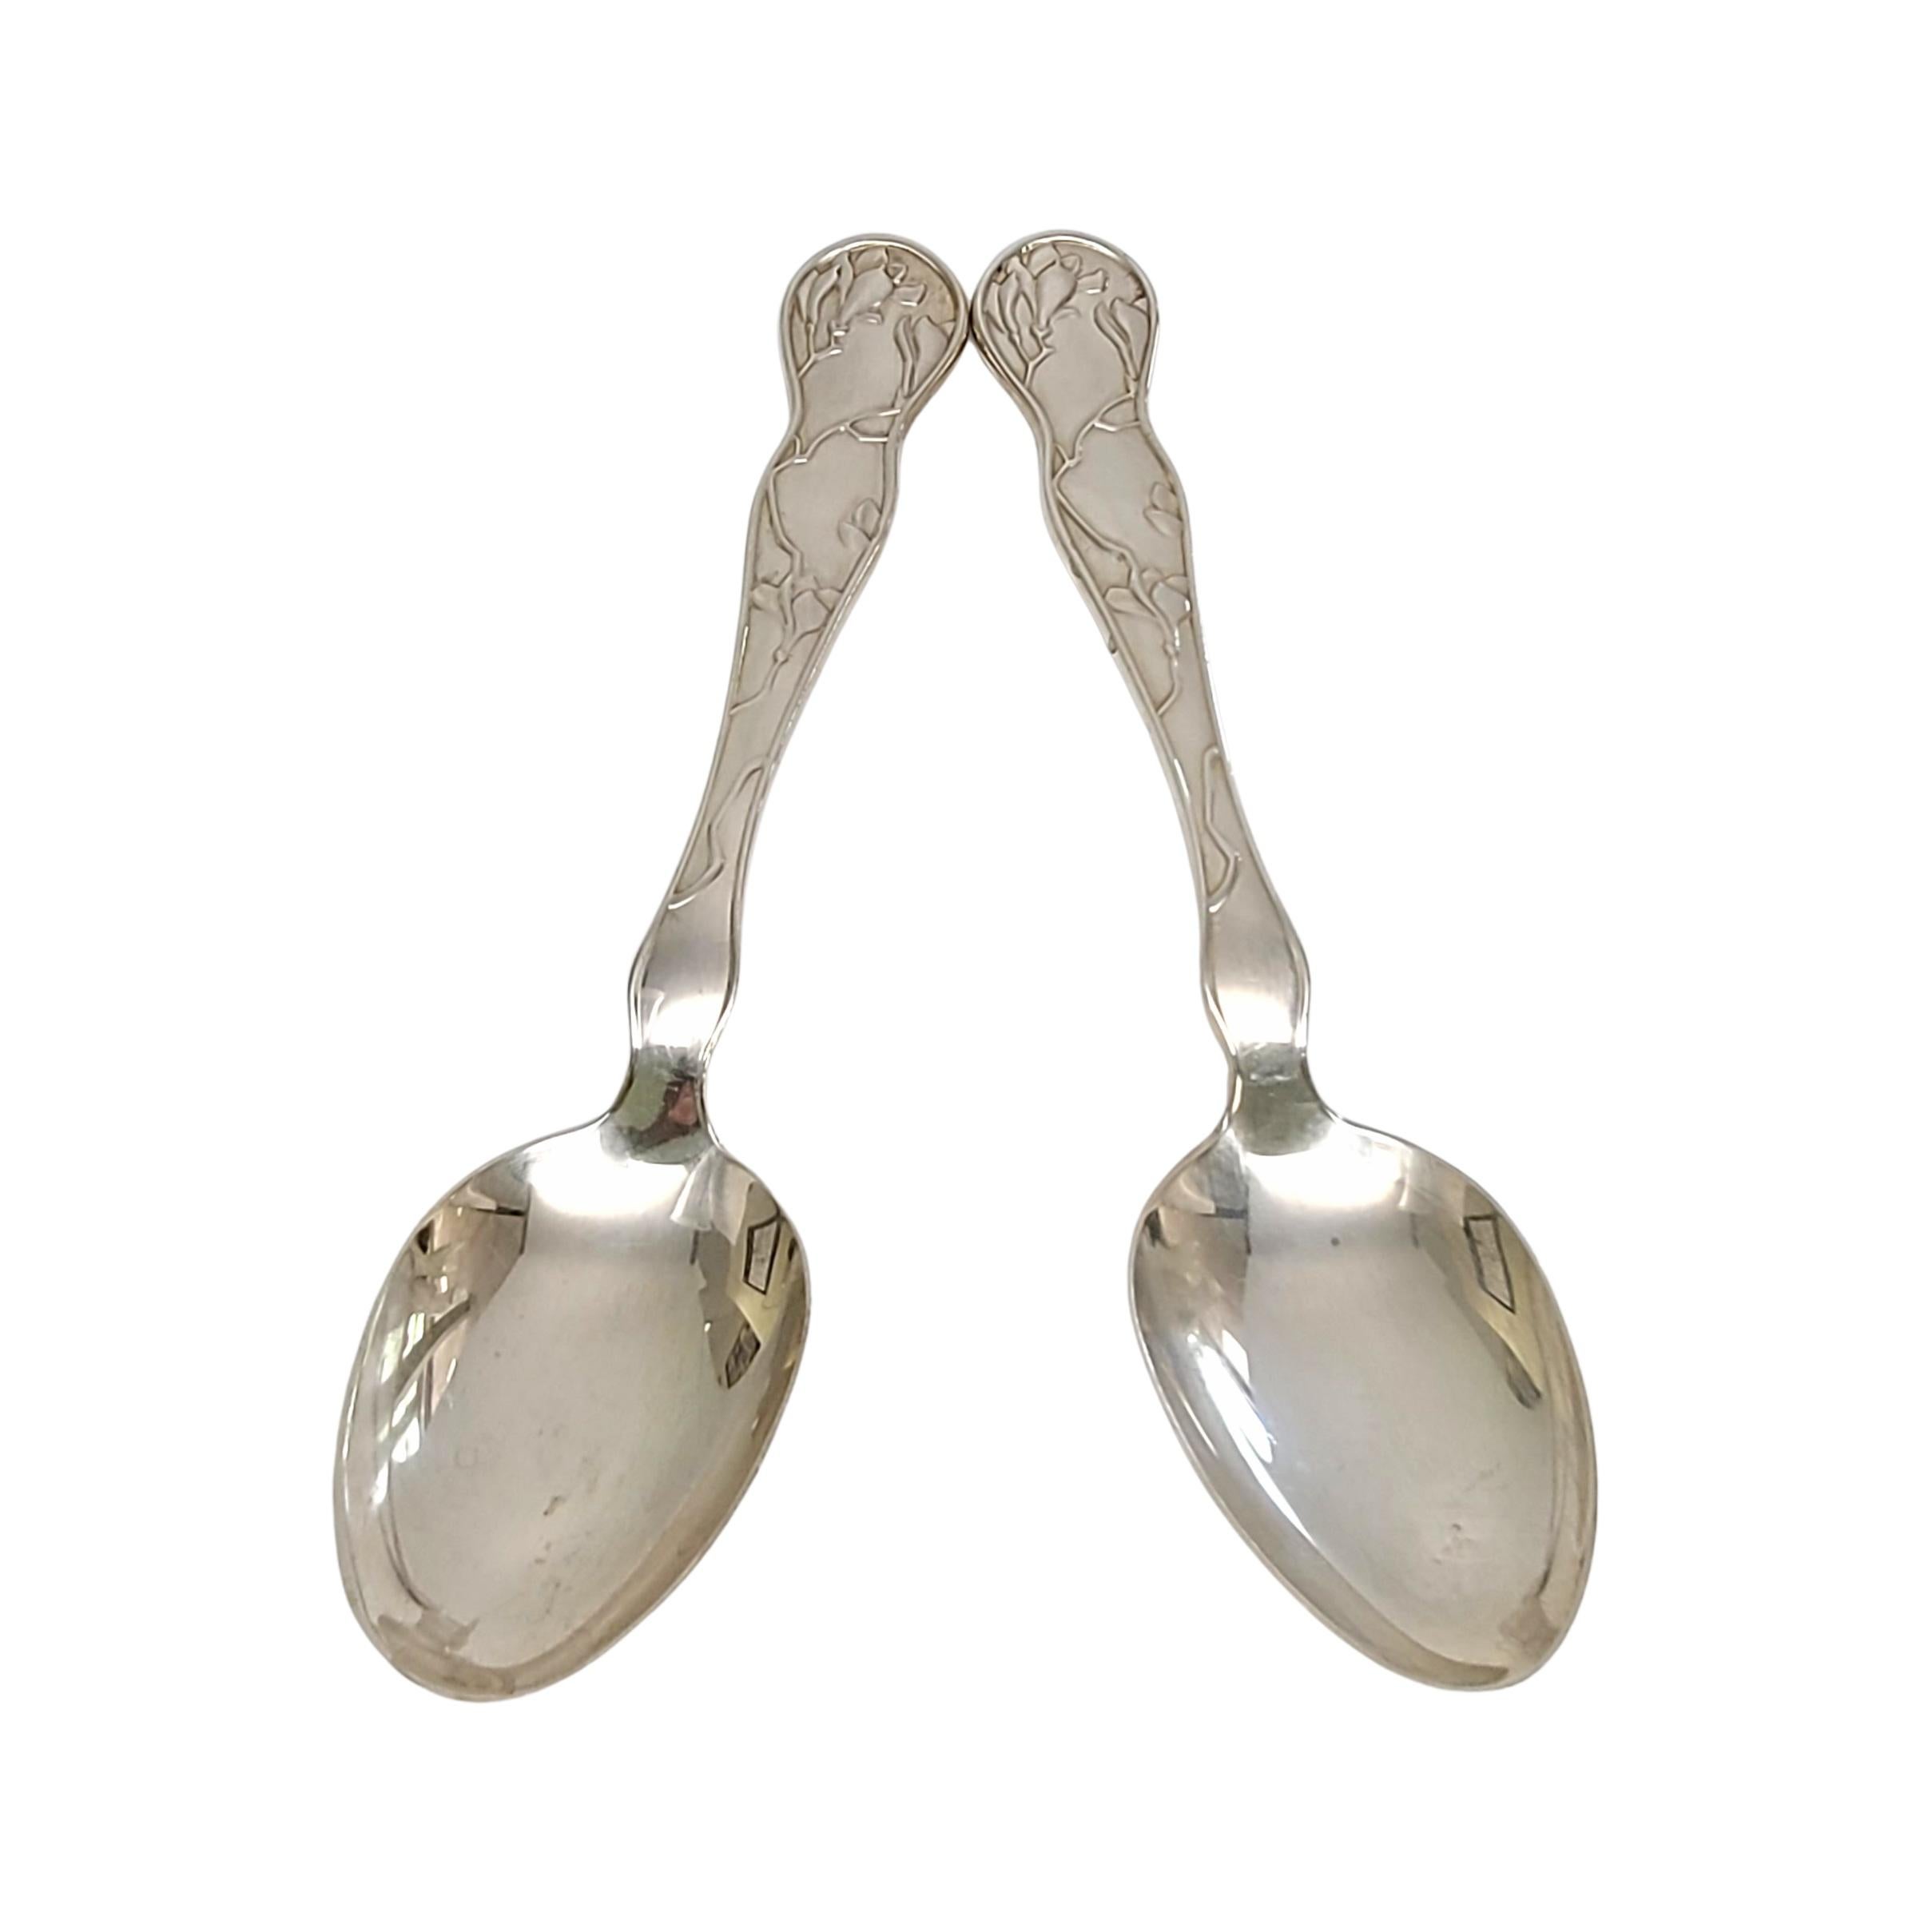 Set of 2 sterling silver serving tablespoons by Tiffany & Co in the American Garden pattern.

No monogram

American Garden is a multi-motif pattern inspired by the extensive botanical beauty of the United States. Includes 2 Tiffany